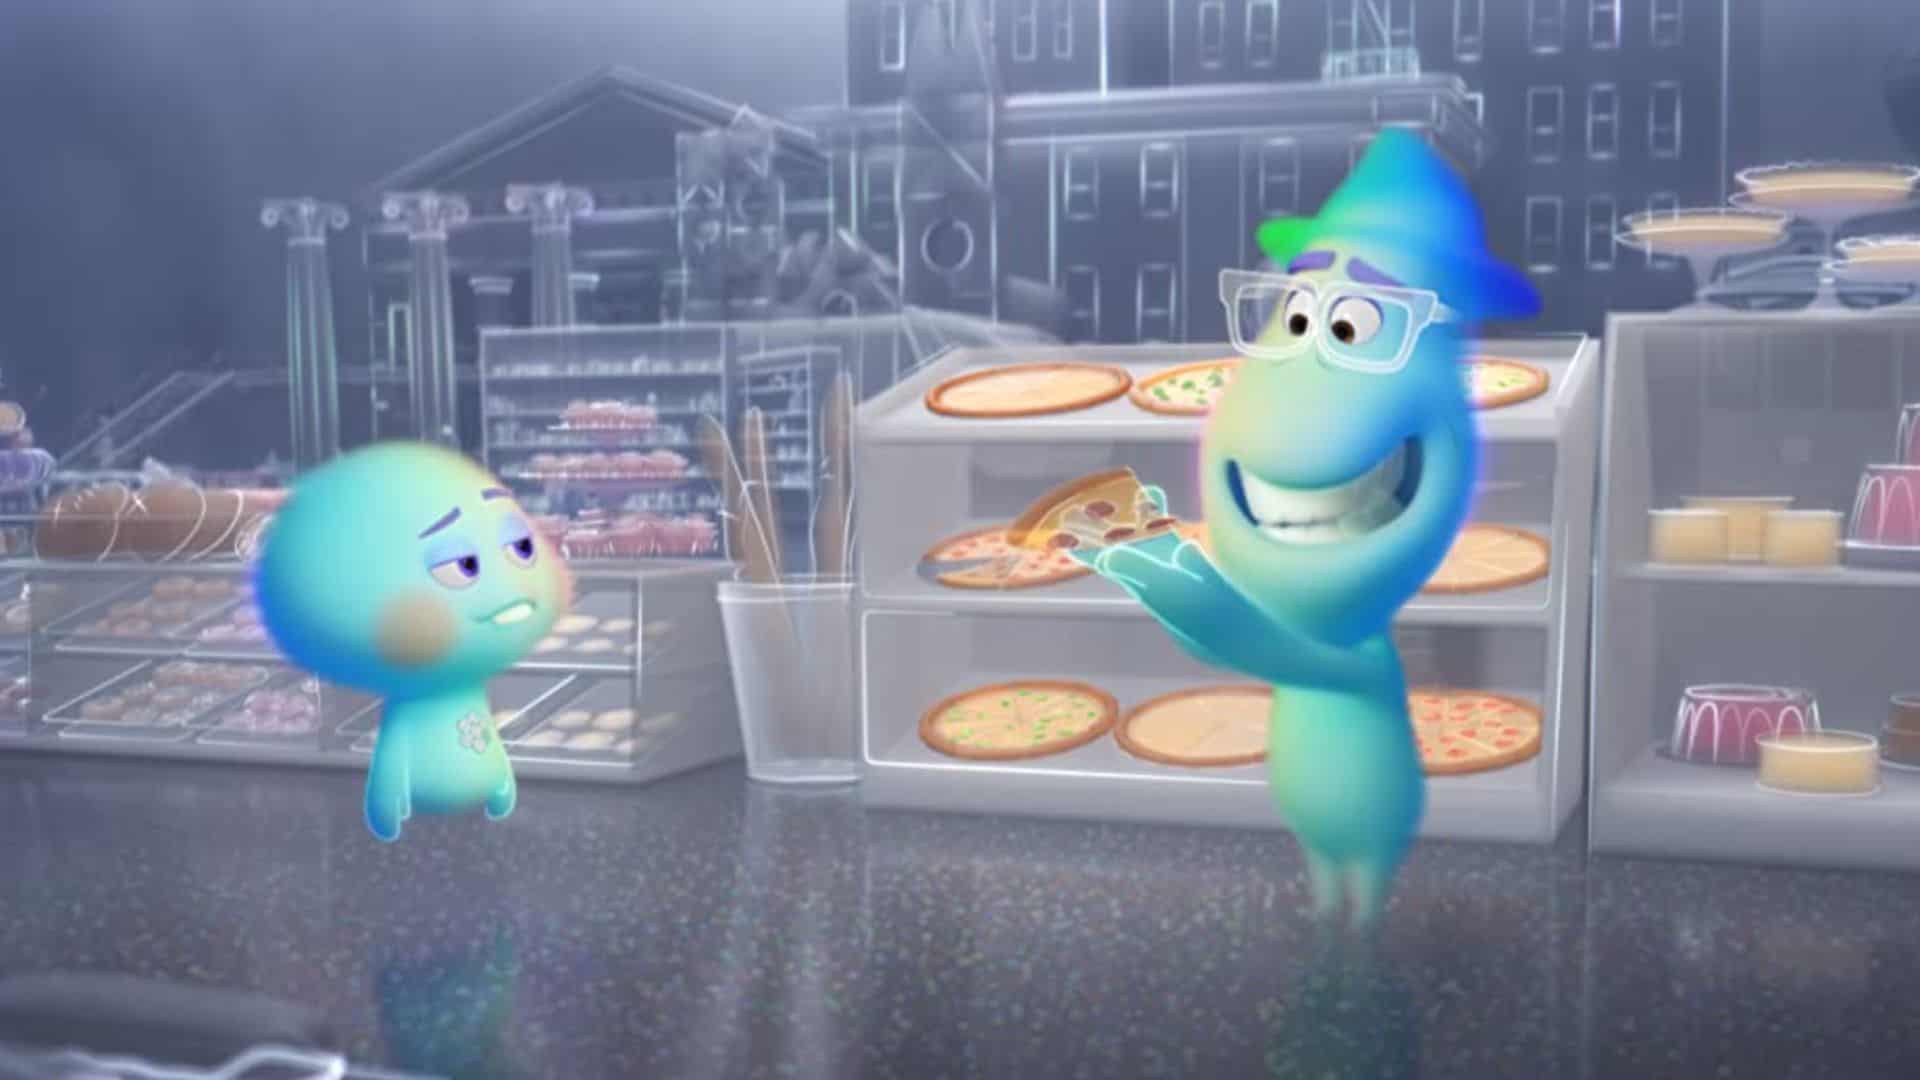 Two souls examine a slice of pizza in this image from Pixar Animation Studios.